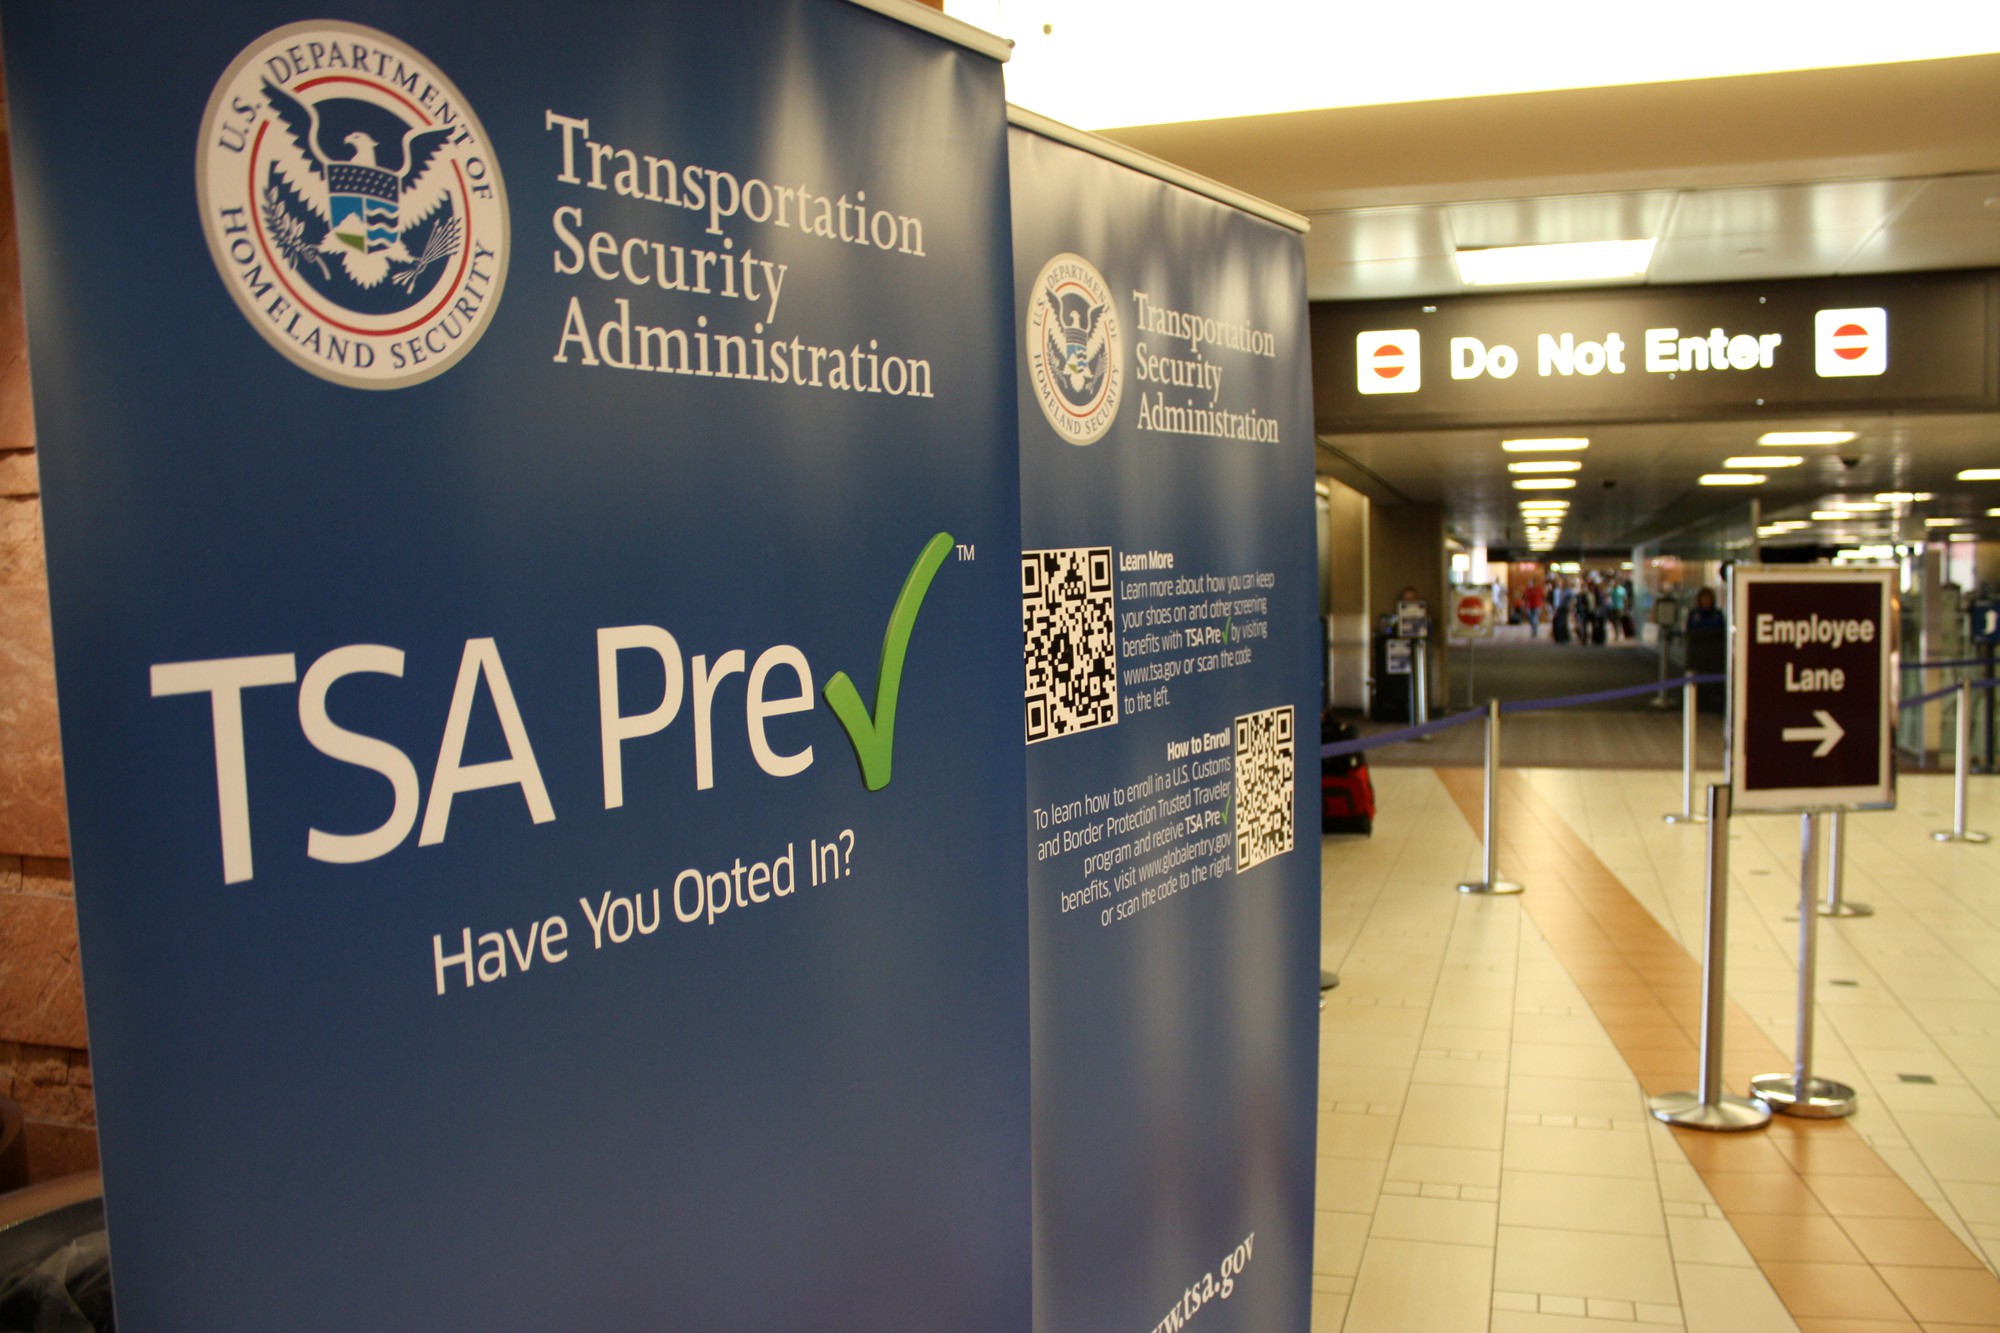 By participating in the TSA's Pre-Check program, eligible passengers can keep their shoes on, wear a light jacket and wear a belt when going through security. However, their bags are still X-rayed, they're required to pass through a metal detector and passengers aren't always guaranteed an expedited process.